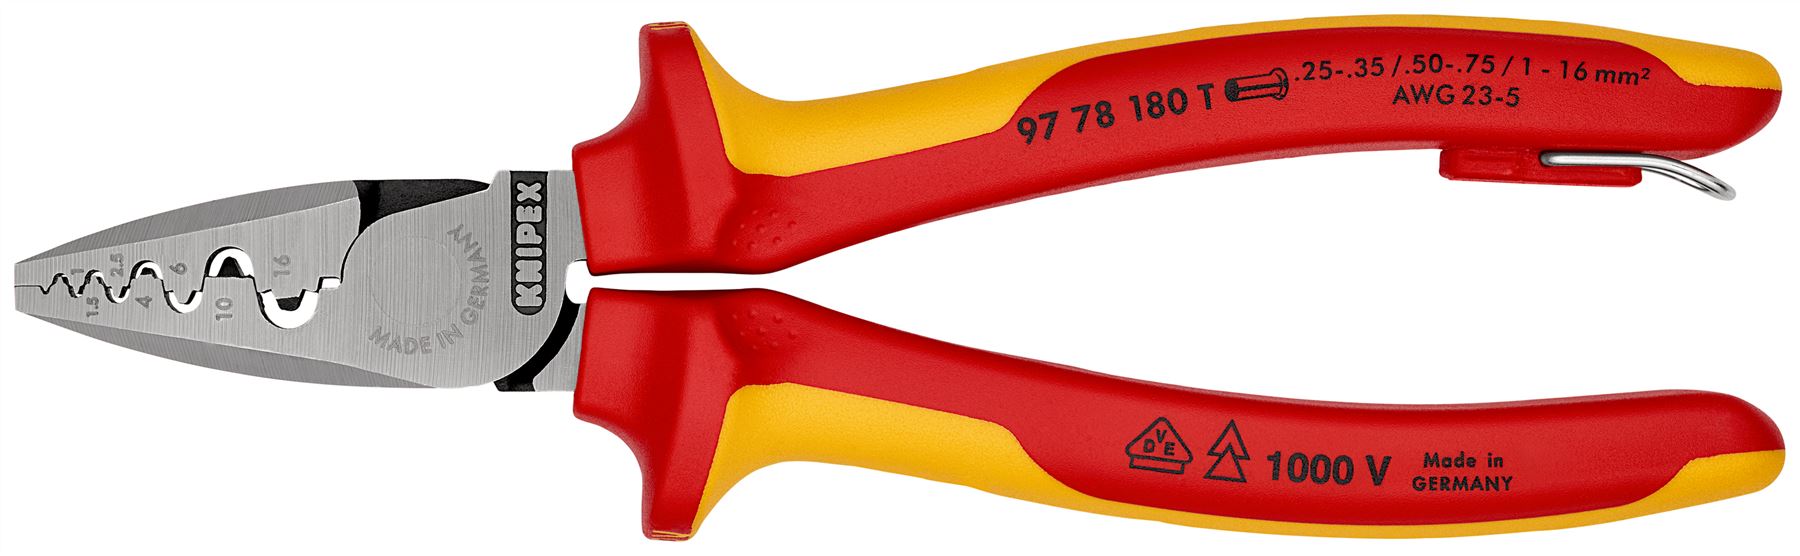 Knipex Crimping Pliers for Wire Ferrules 180mm VDE Insulated 1000V with Tether Point 97 78 180 T